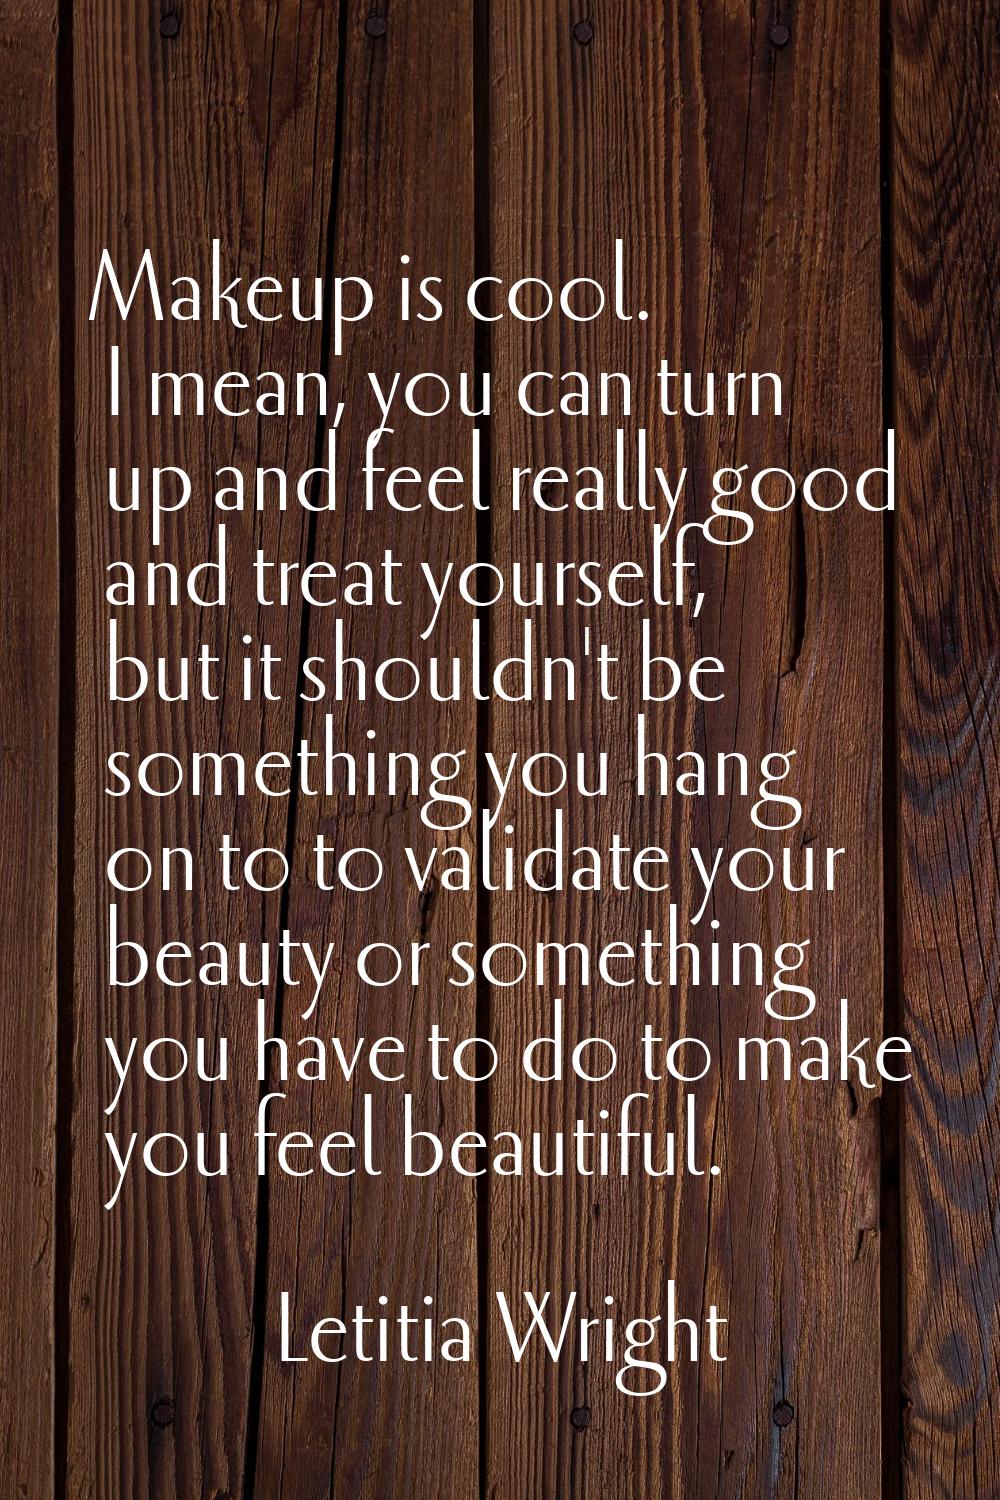 Makeup is cool. I mean, you can turn up and feel really good and treat yourself, but it shouldn't b